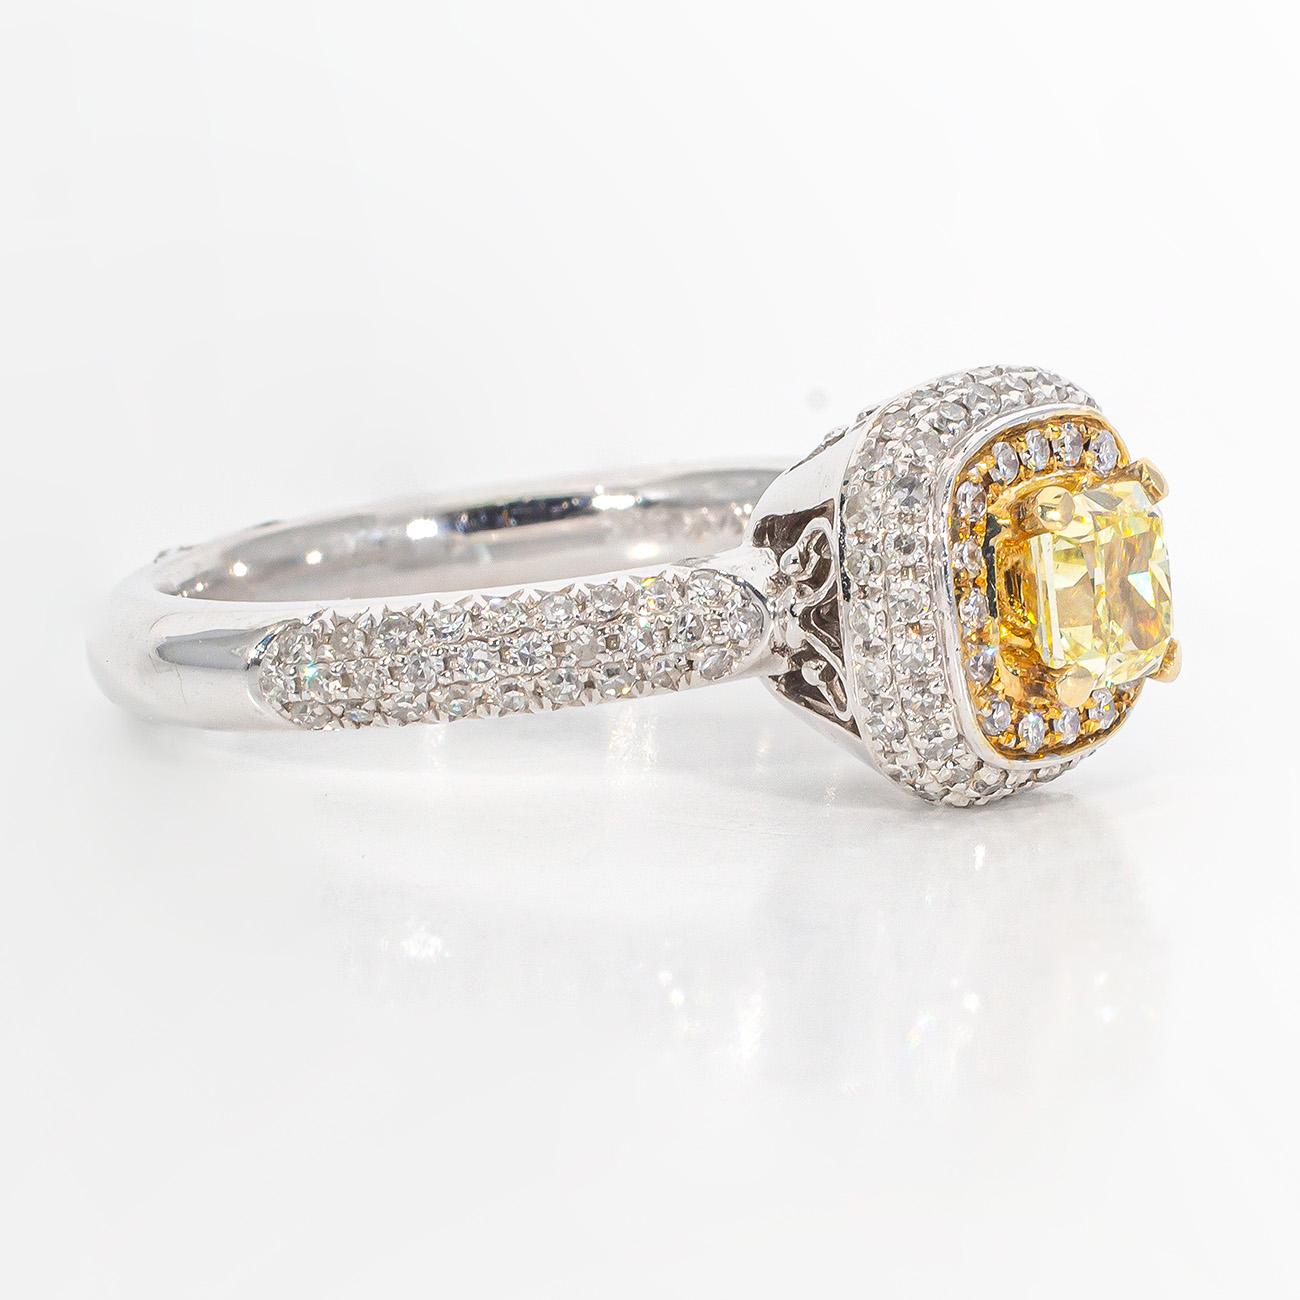 Halo ring in 14K two-tone with French pave set rounds around a 4-prong set Fancy Yellow cushion cut diamond center.  D0.99ct.t.w.  (Center 0.52ct.)  Size 7